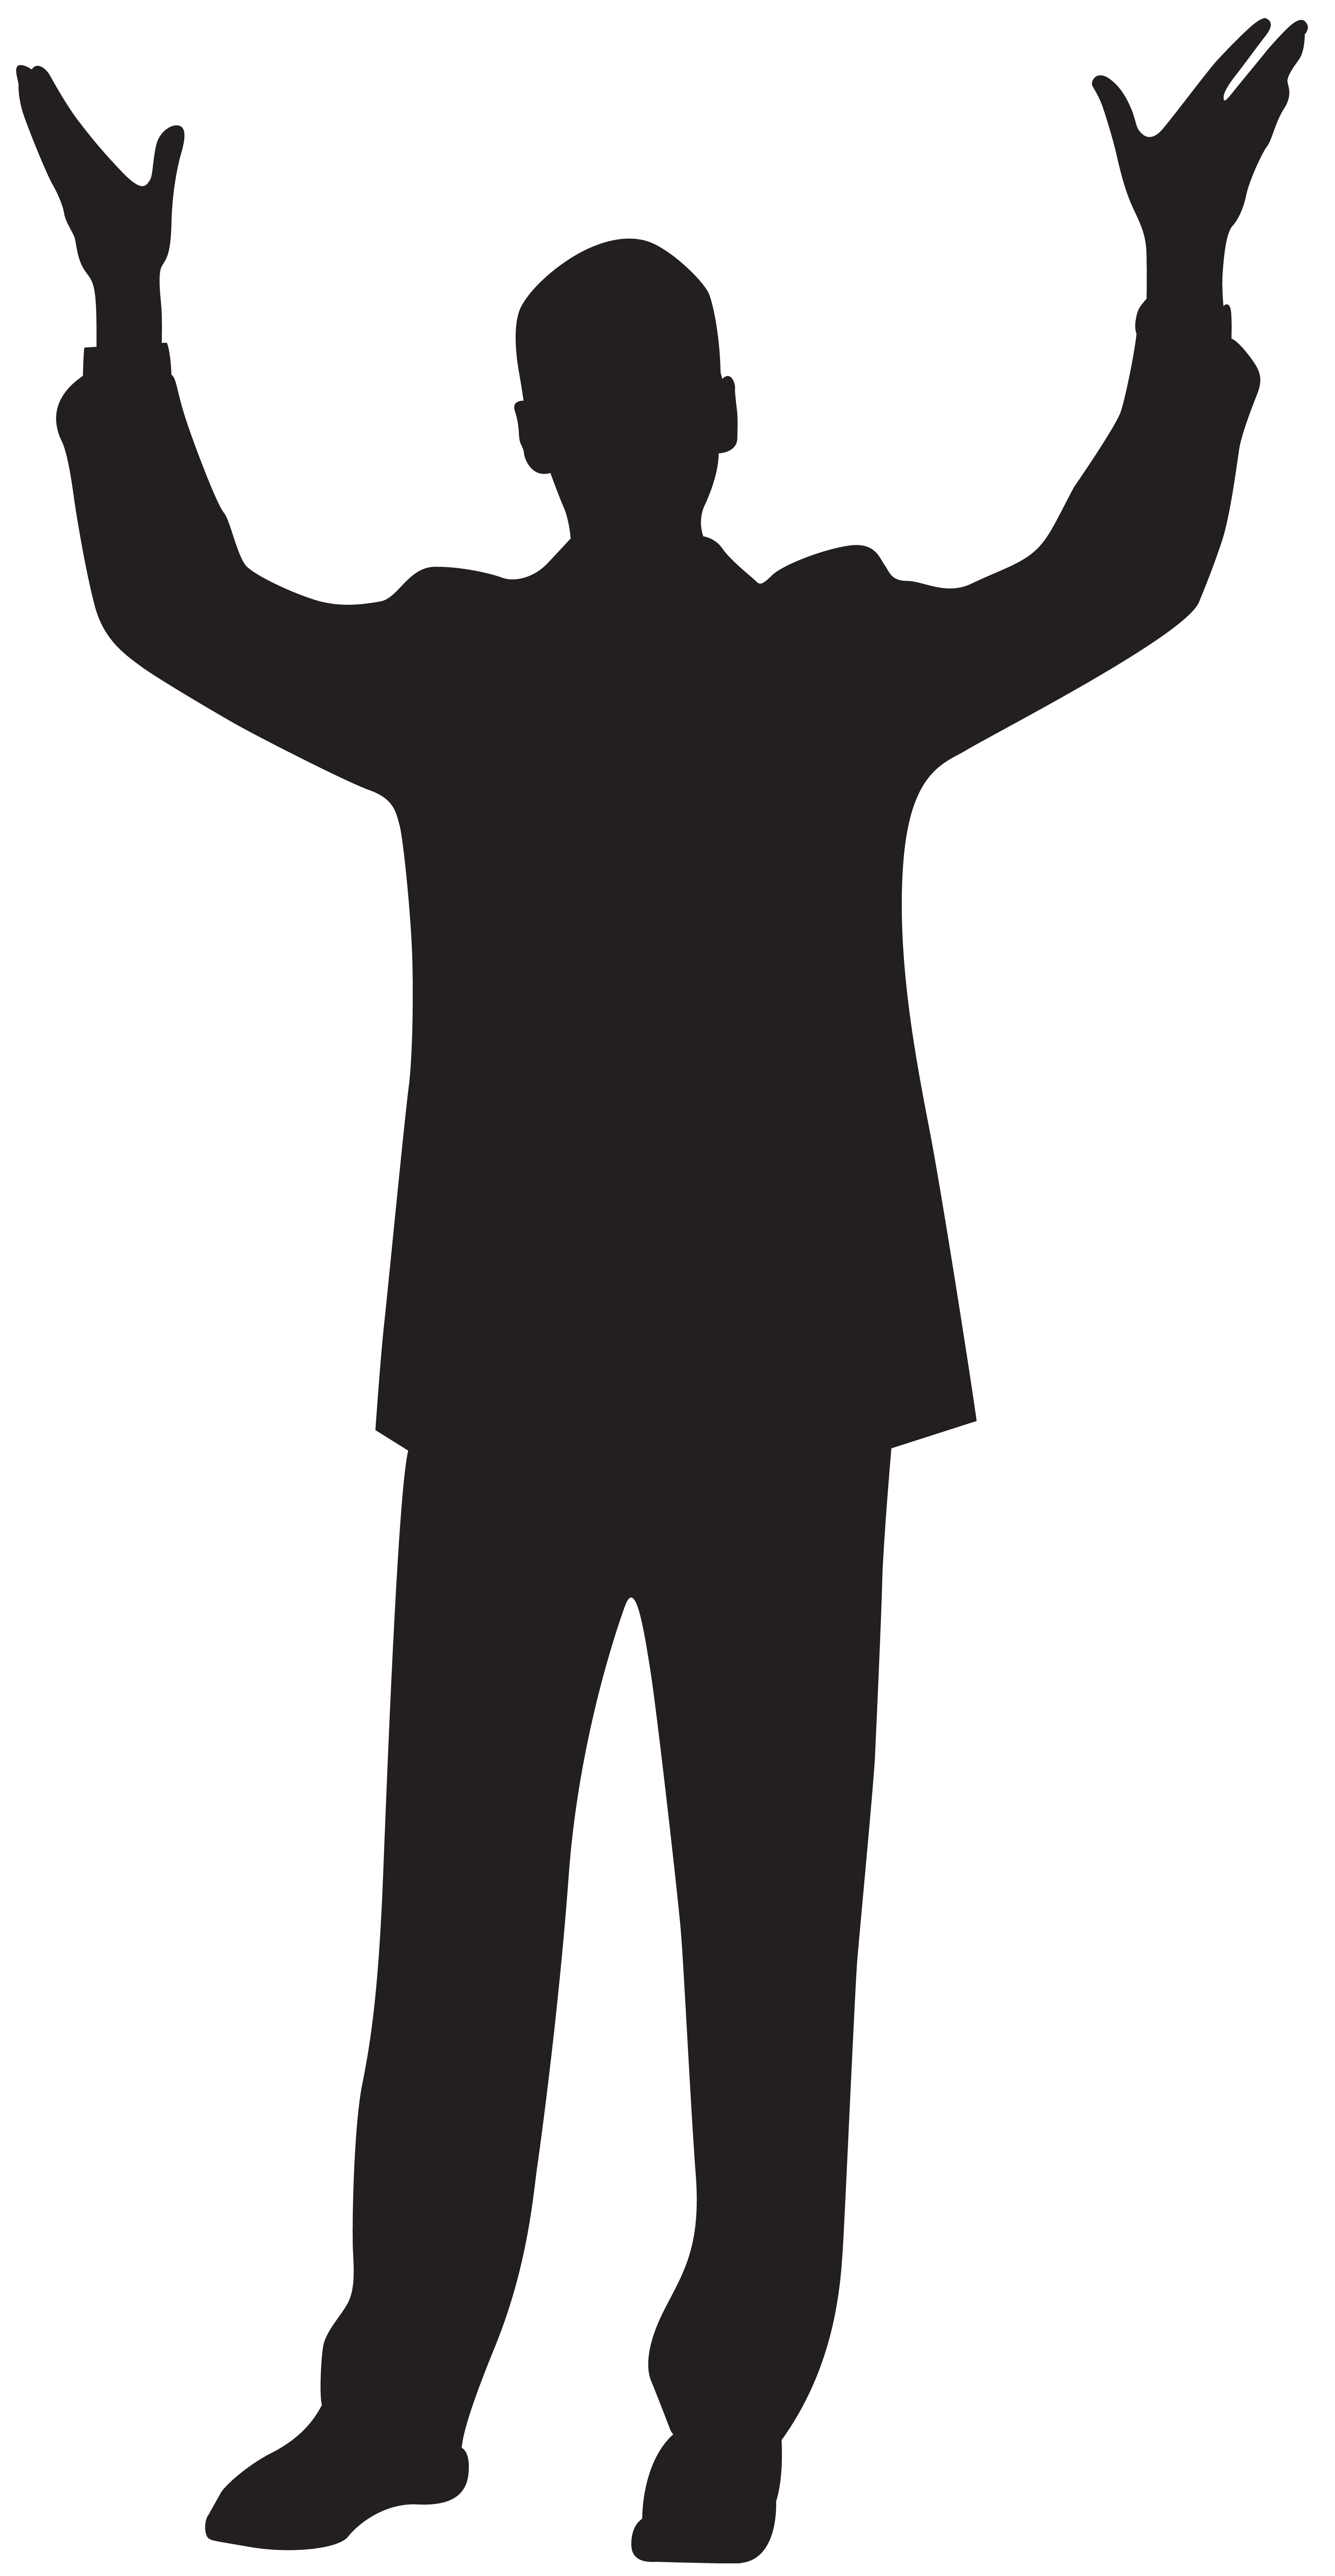 Watermelon clipart silhouette. Man with hands up